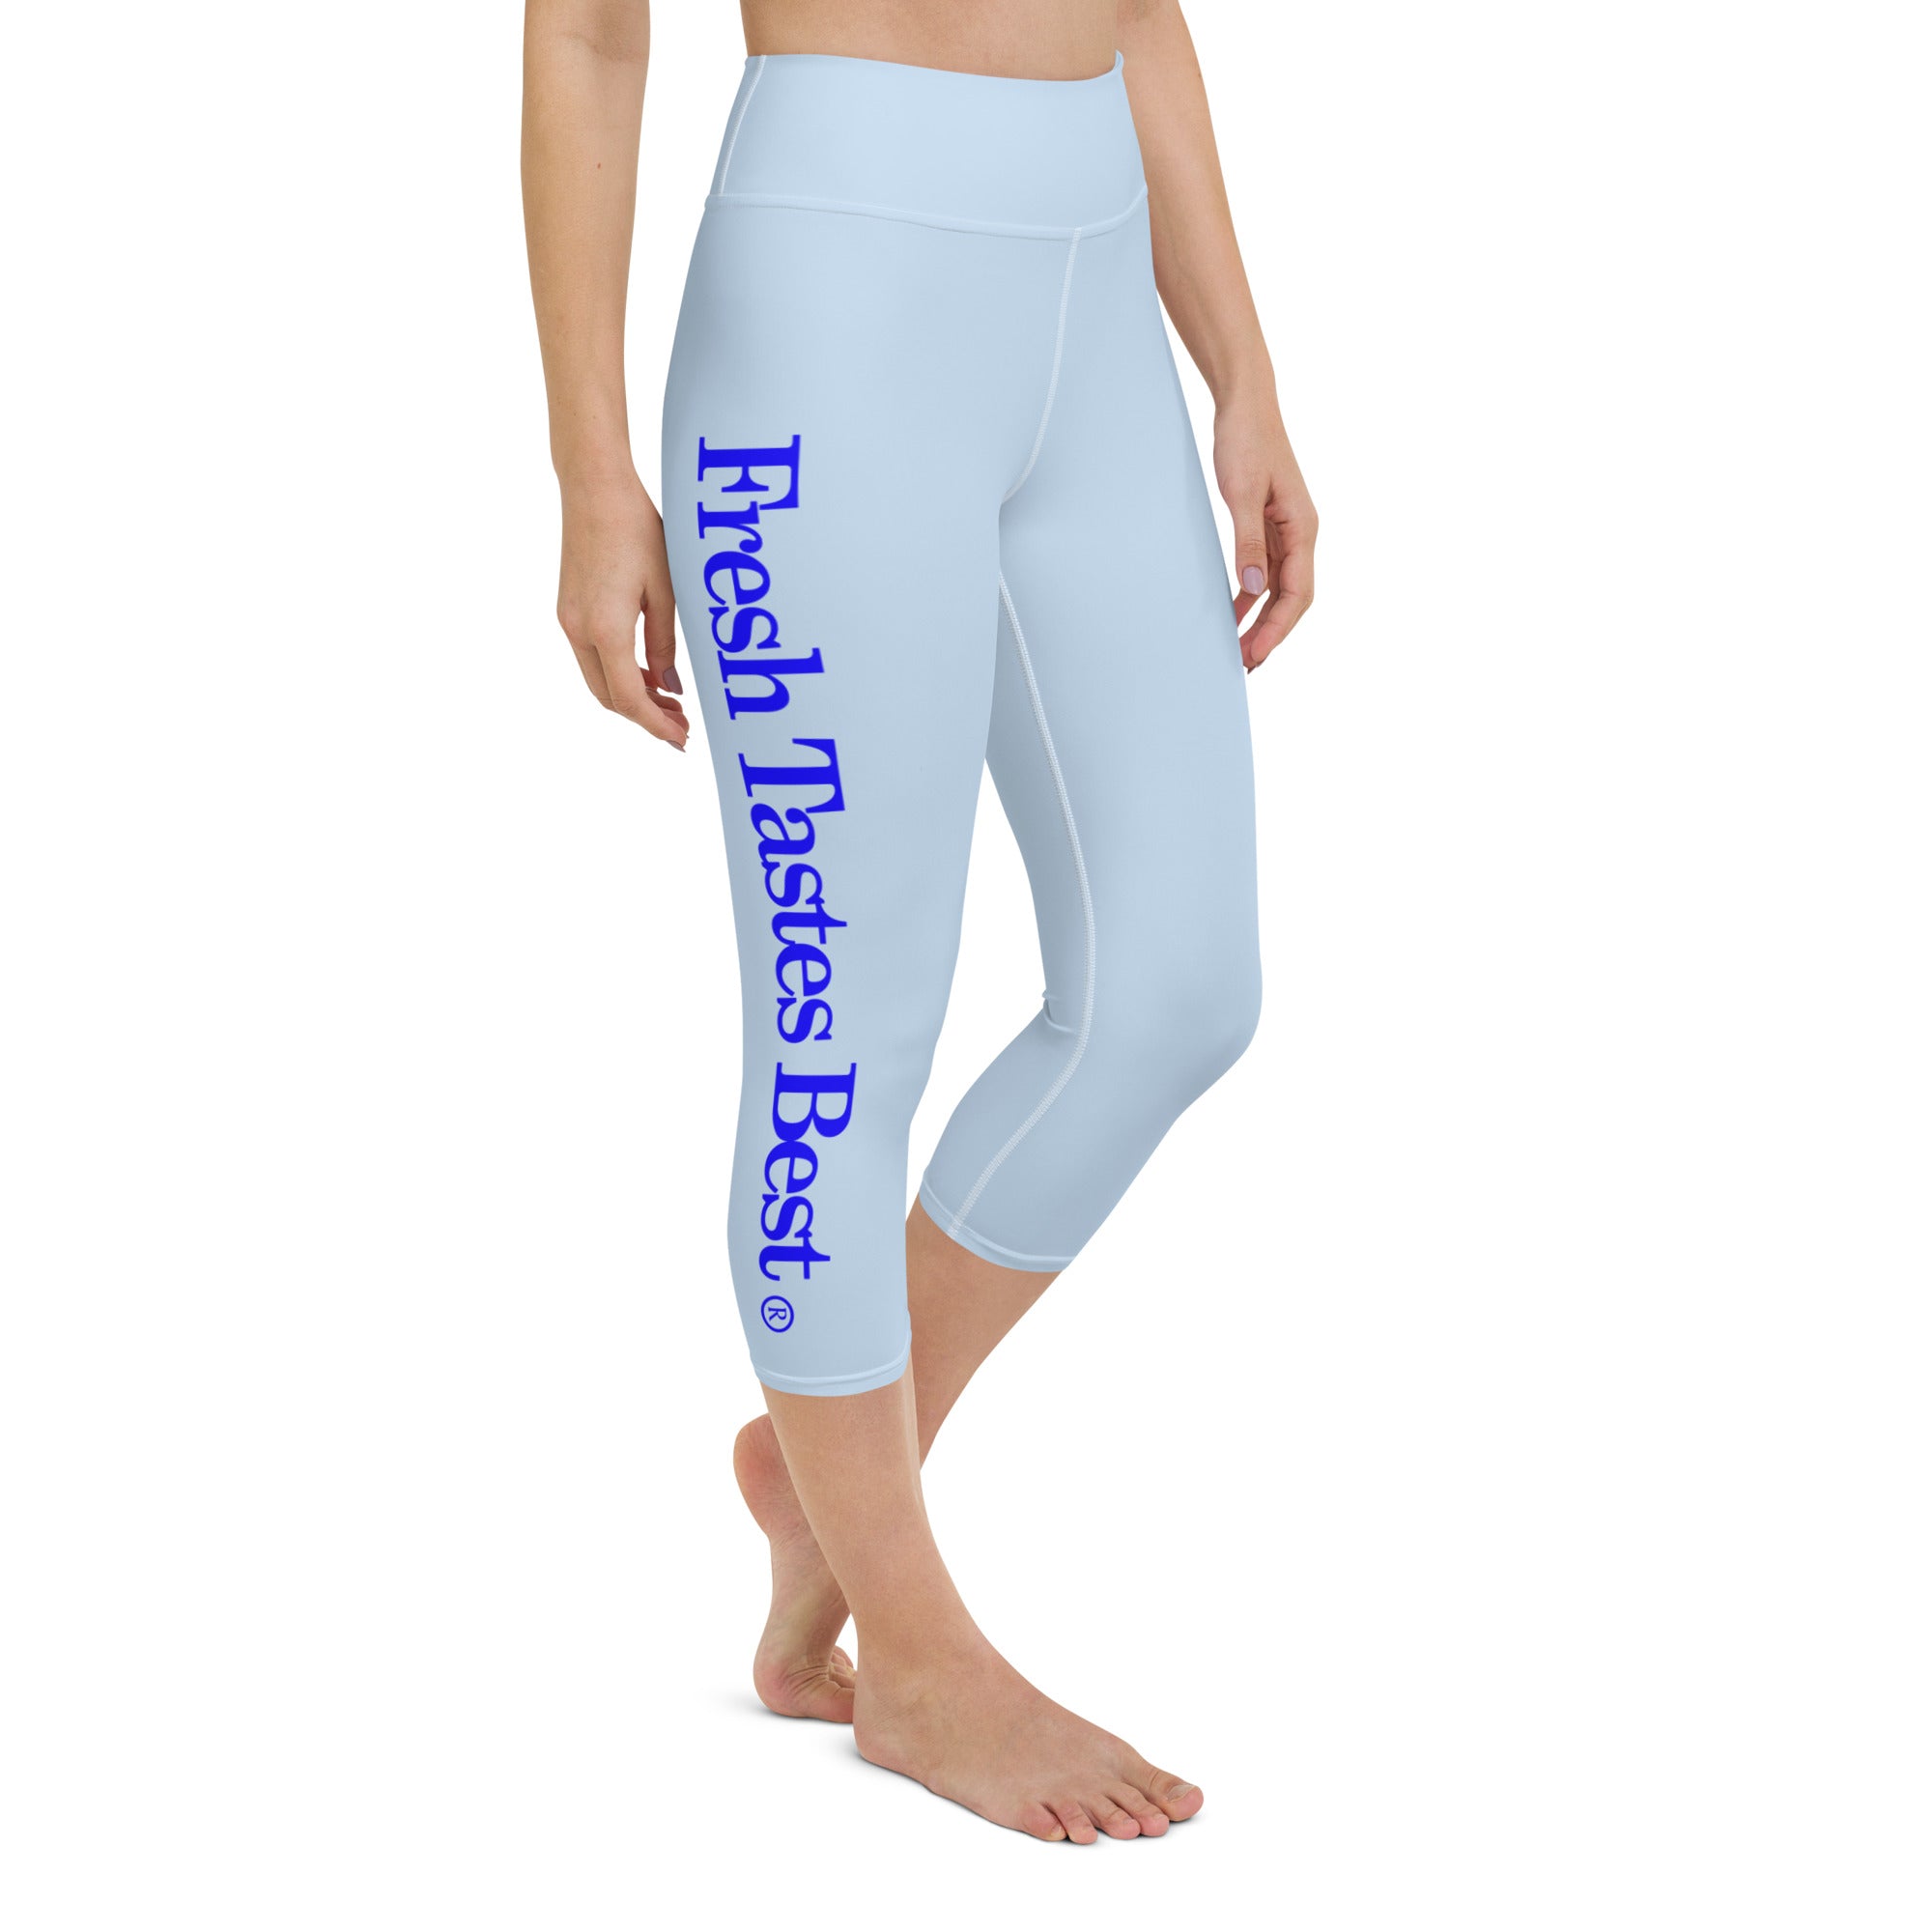 9 Best Yoga Pants For Women on Amazon | Top Ranked and Reviewed